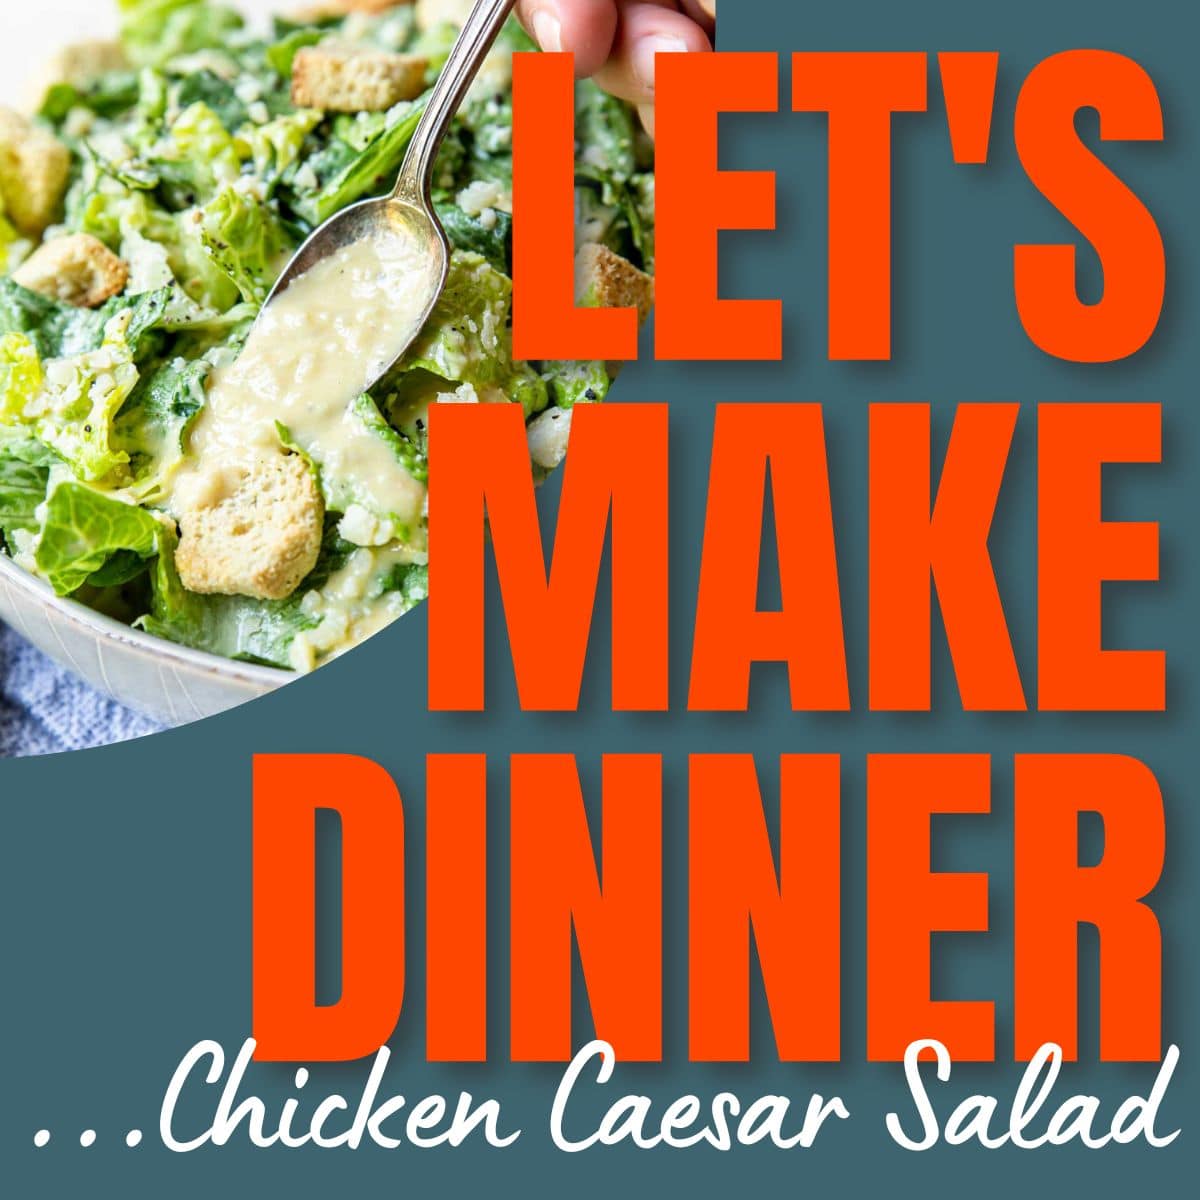 Let's Make Dinner text with a picture of a caesar salad